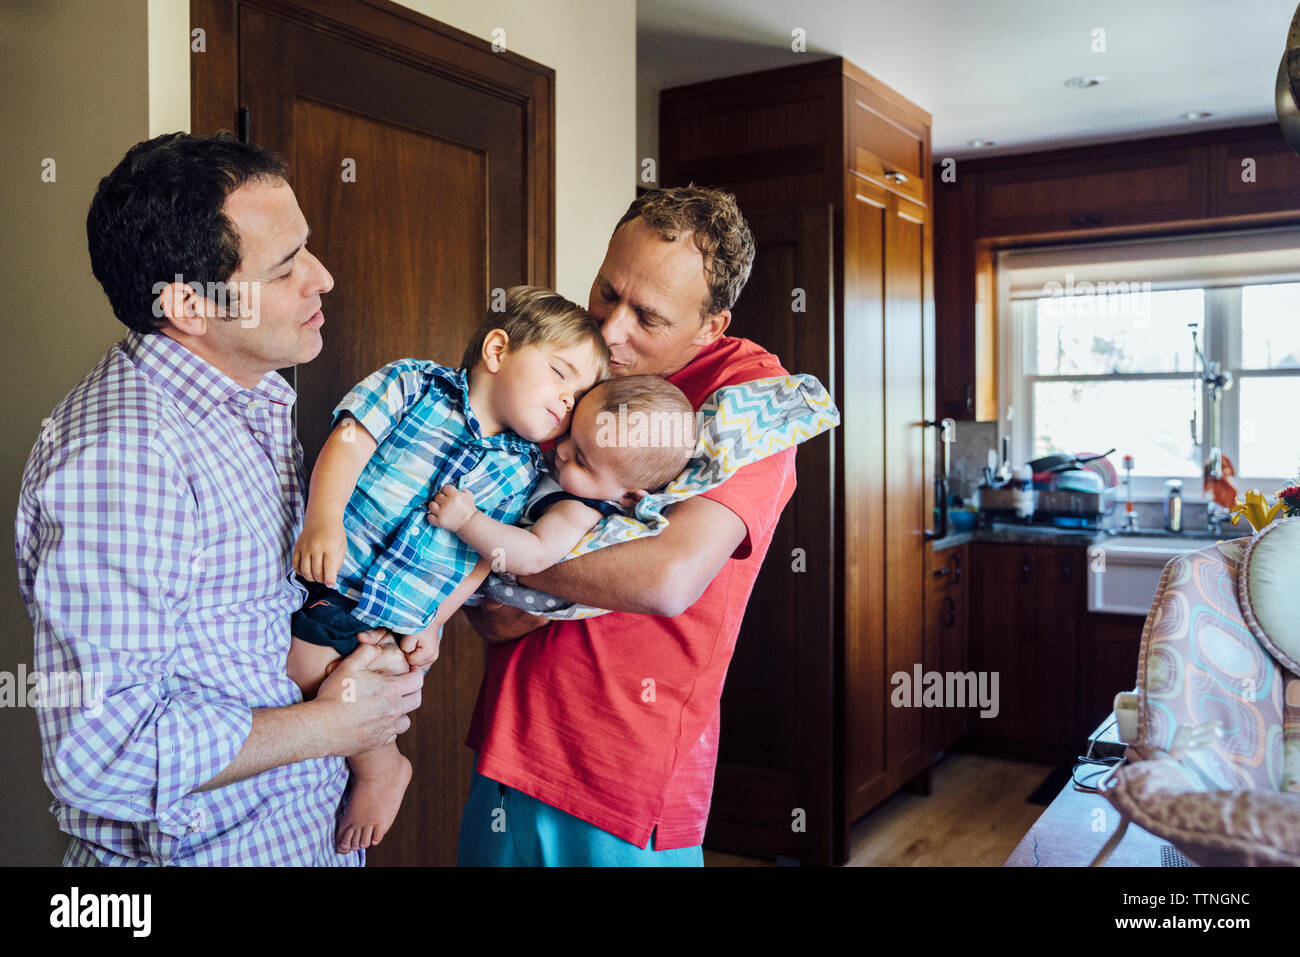 Homosexual couple holding sons at home Stock Photo